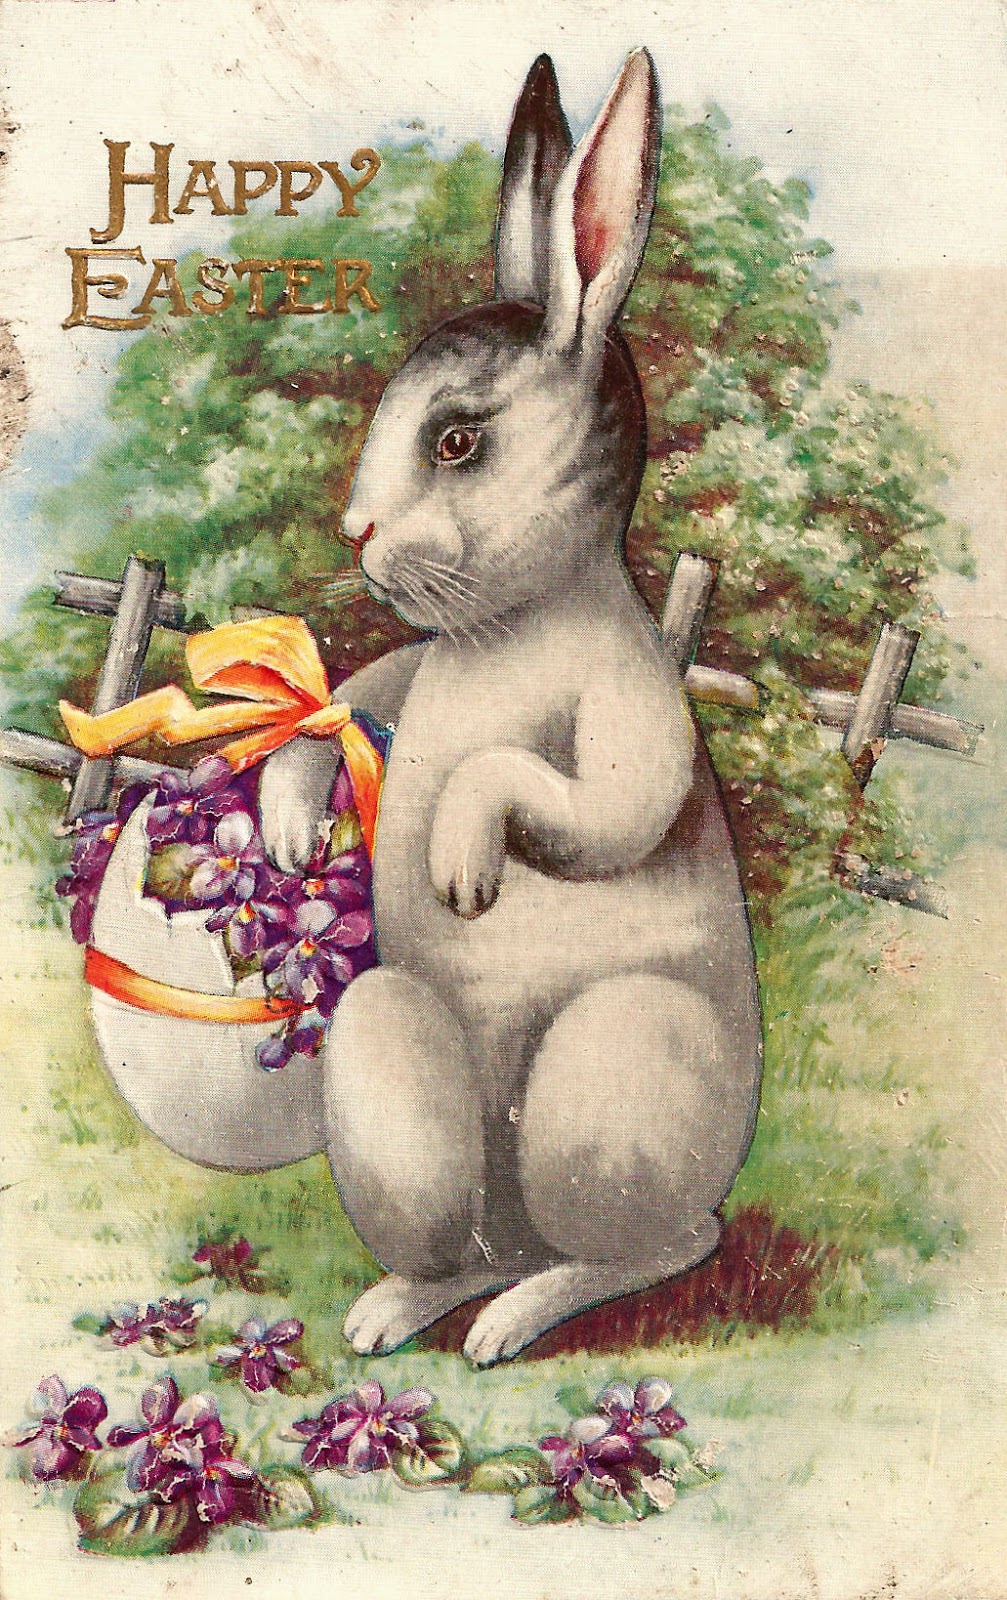 Antique Images  Free Easter Clip Art  Vintage Easter Bunny Carrying